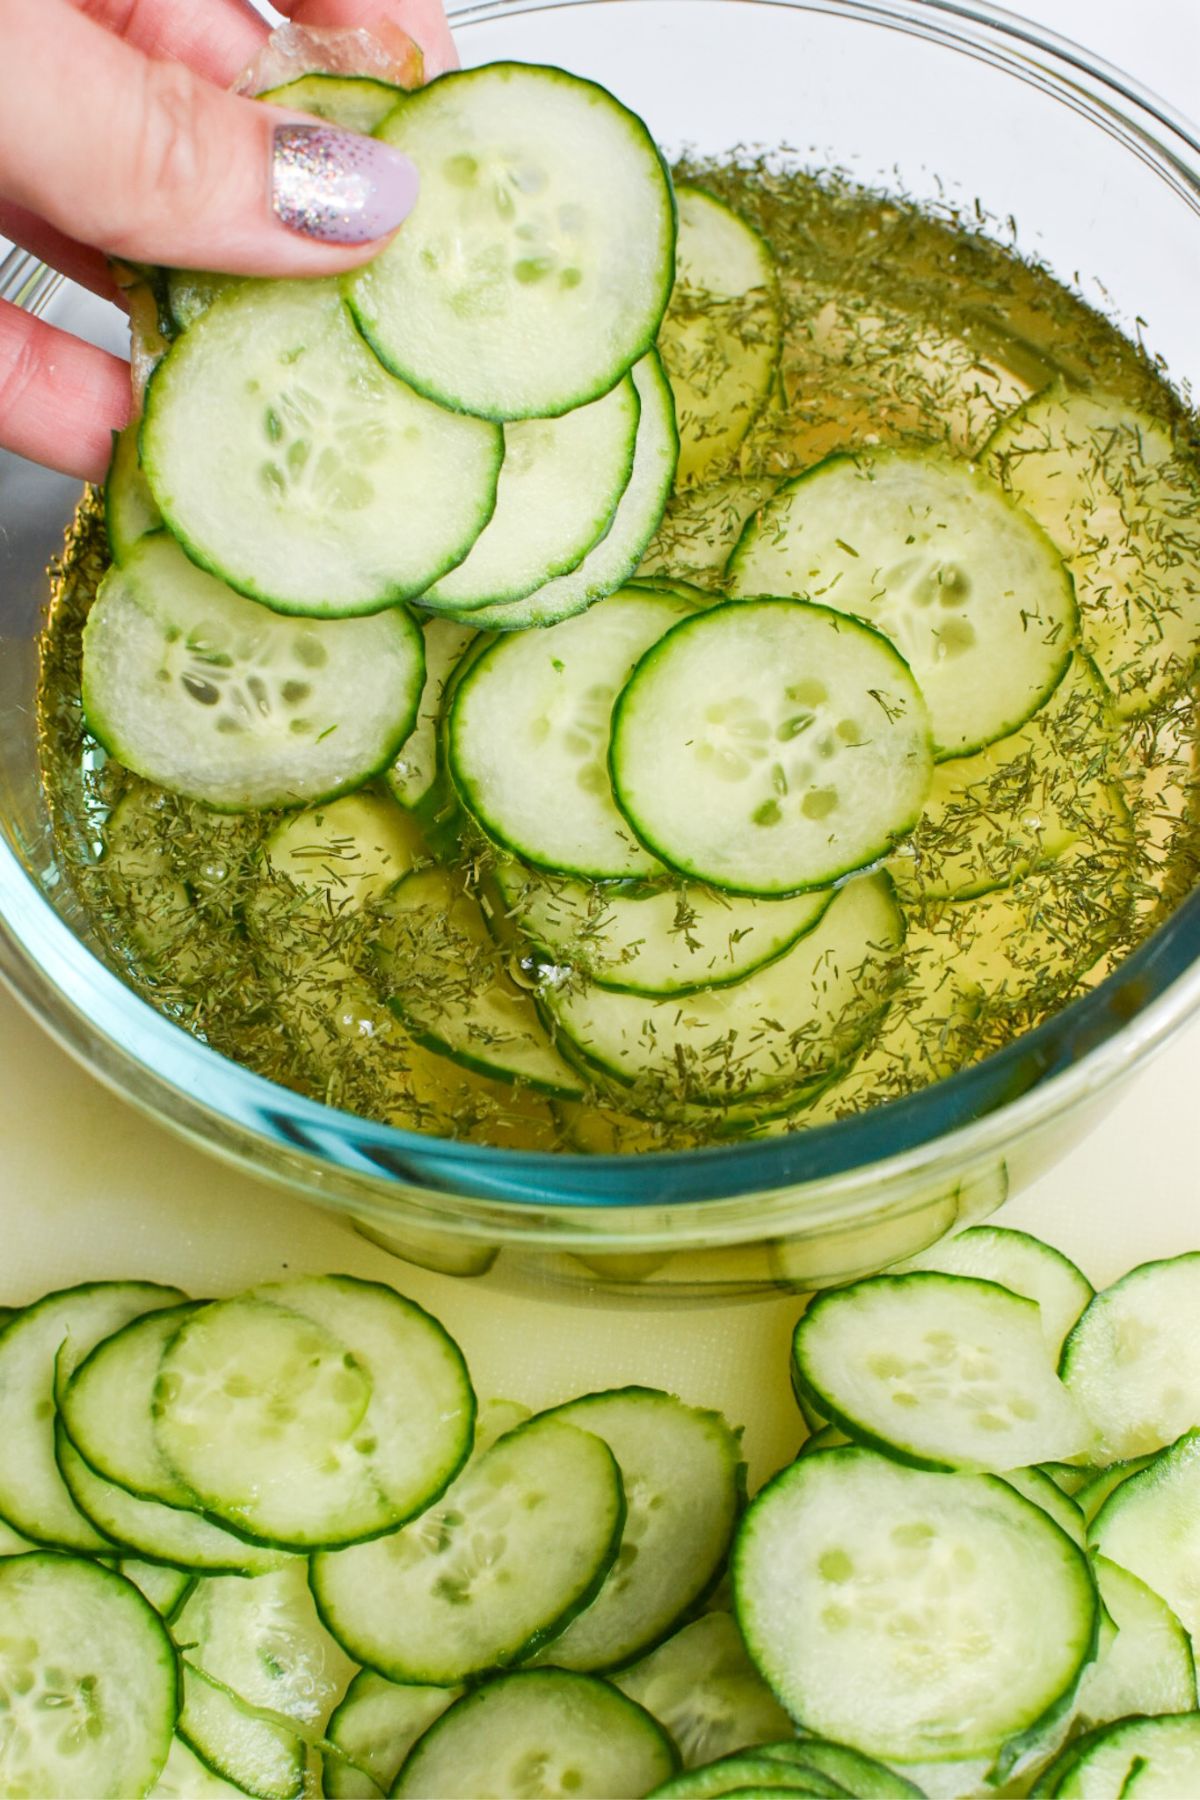 Cucumbers being added to a bowl of apple cider vinegar, water, dill and sugar.